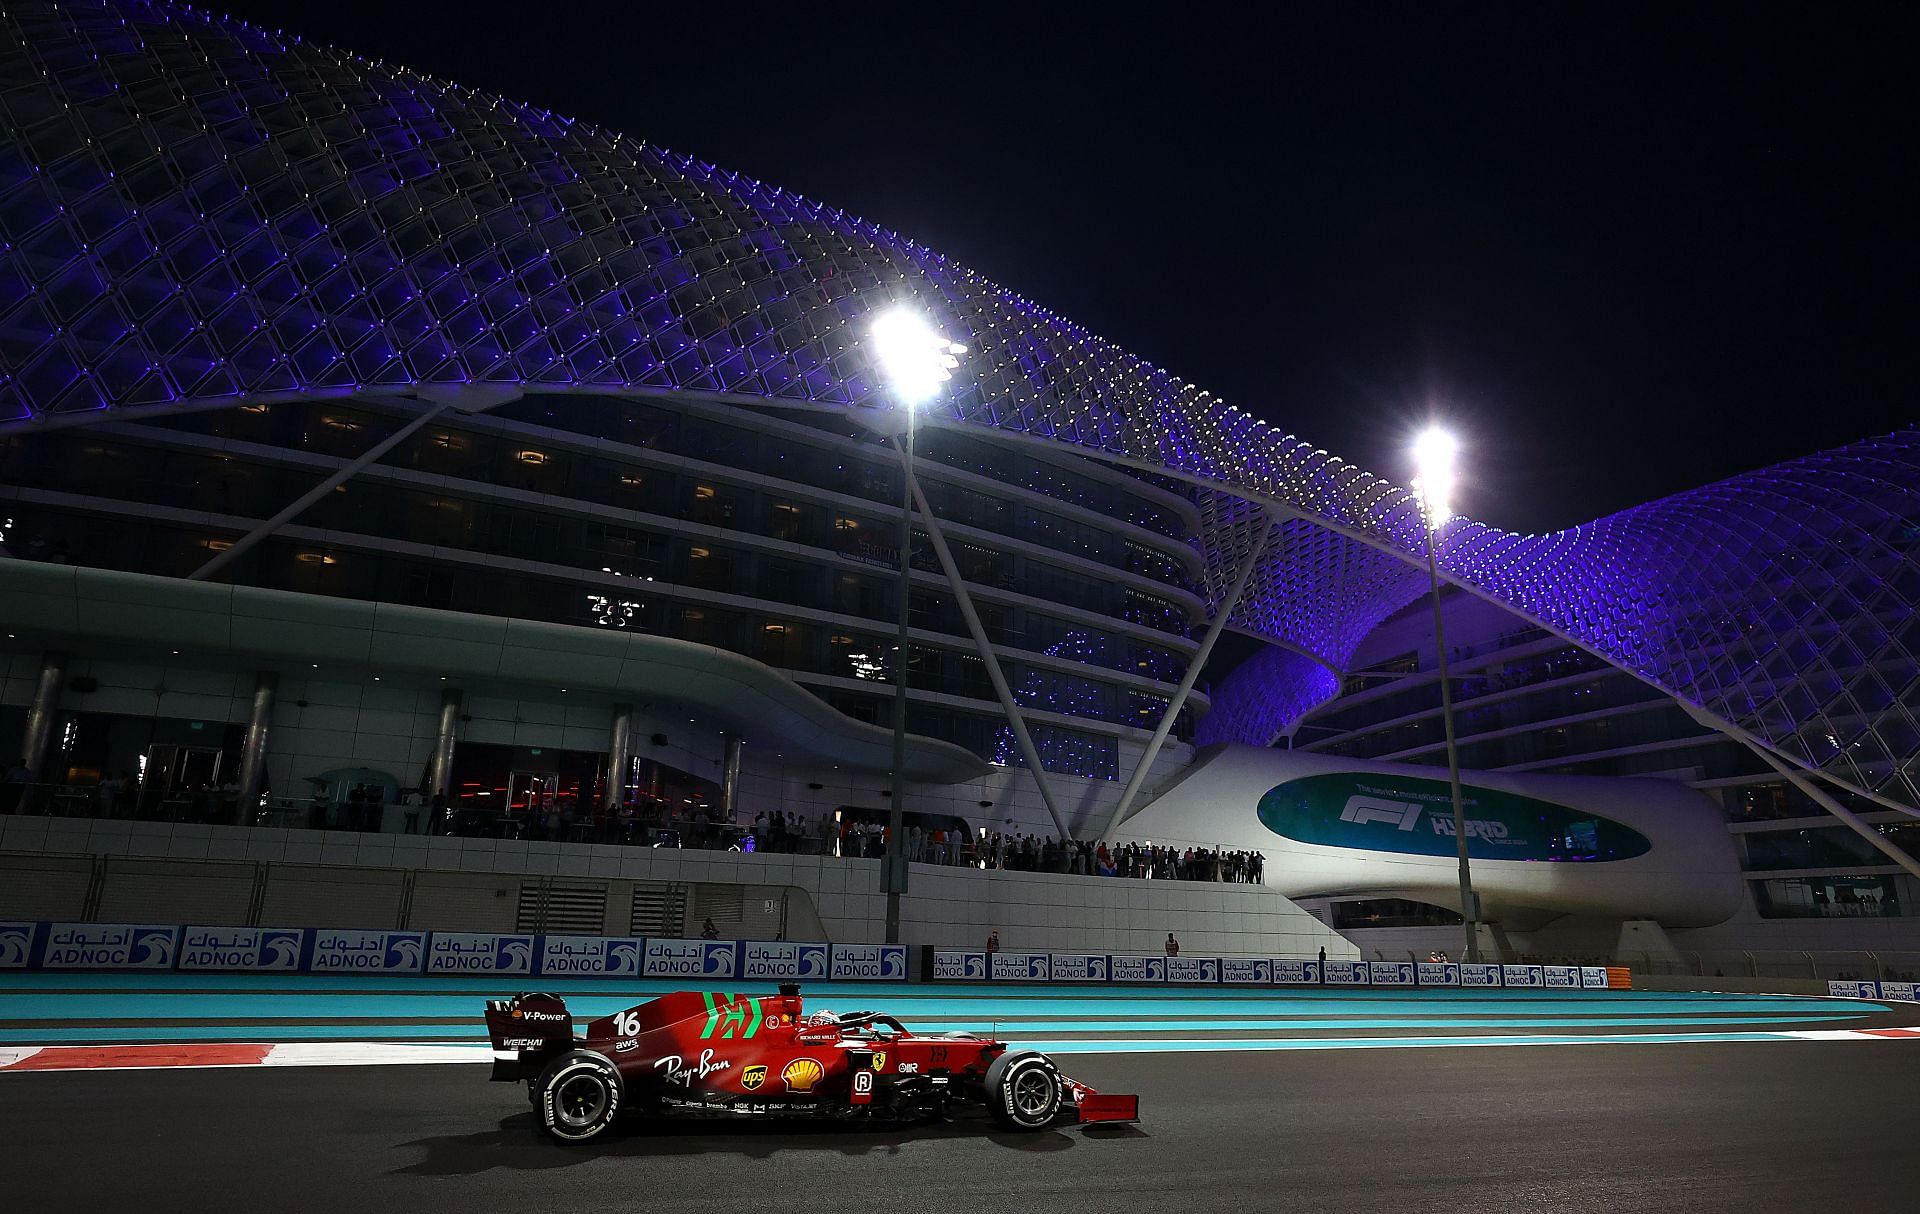 F1 Grand Prix of Abu Dhabi - The Scuderia&#039;s livery will be updated this year